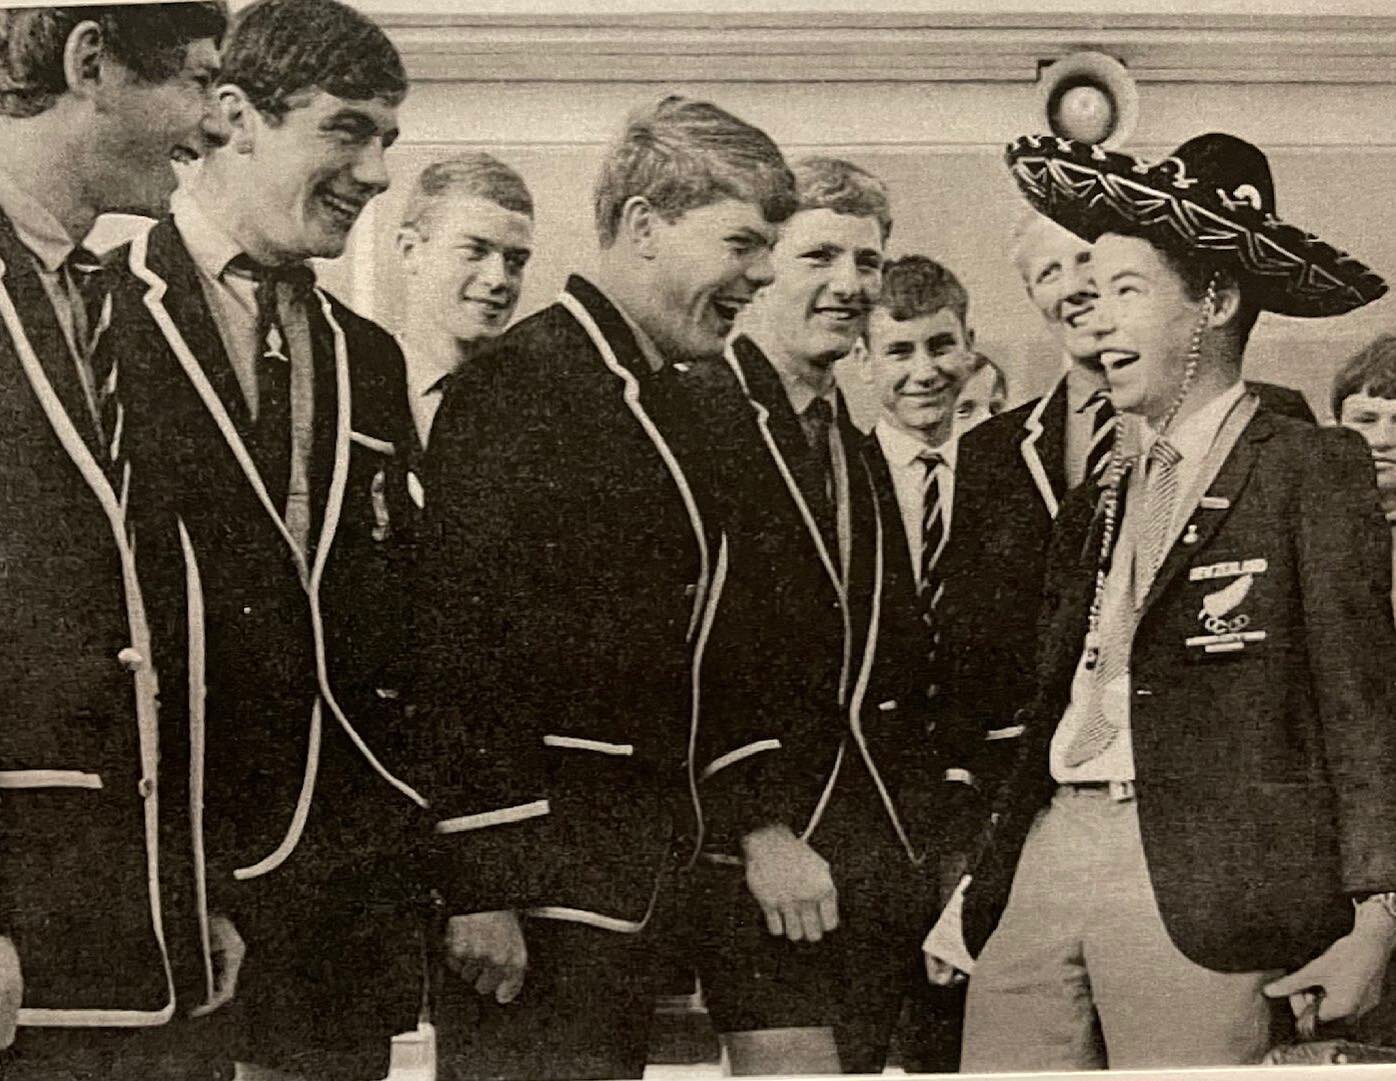 As we near the Olympic Games, we remember those who excelled at their sport and made their country proud. Pictured here is Simon Dickie returning back to high school, Whanganui Collegiate, after winning gold coxing the New Zealand Four at the 1964 Ol